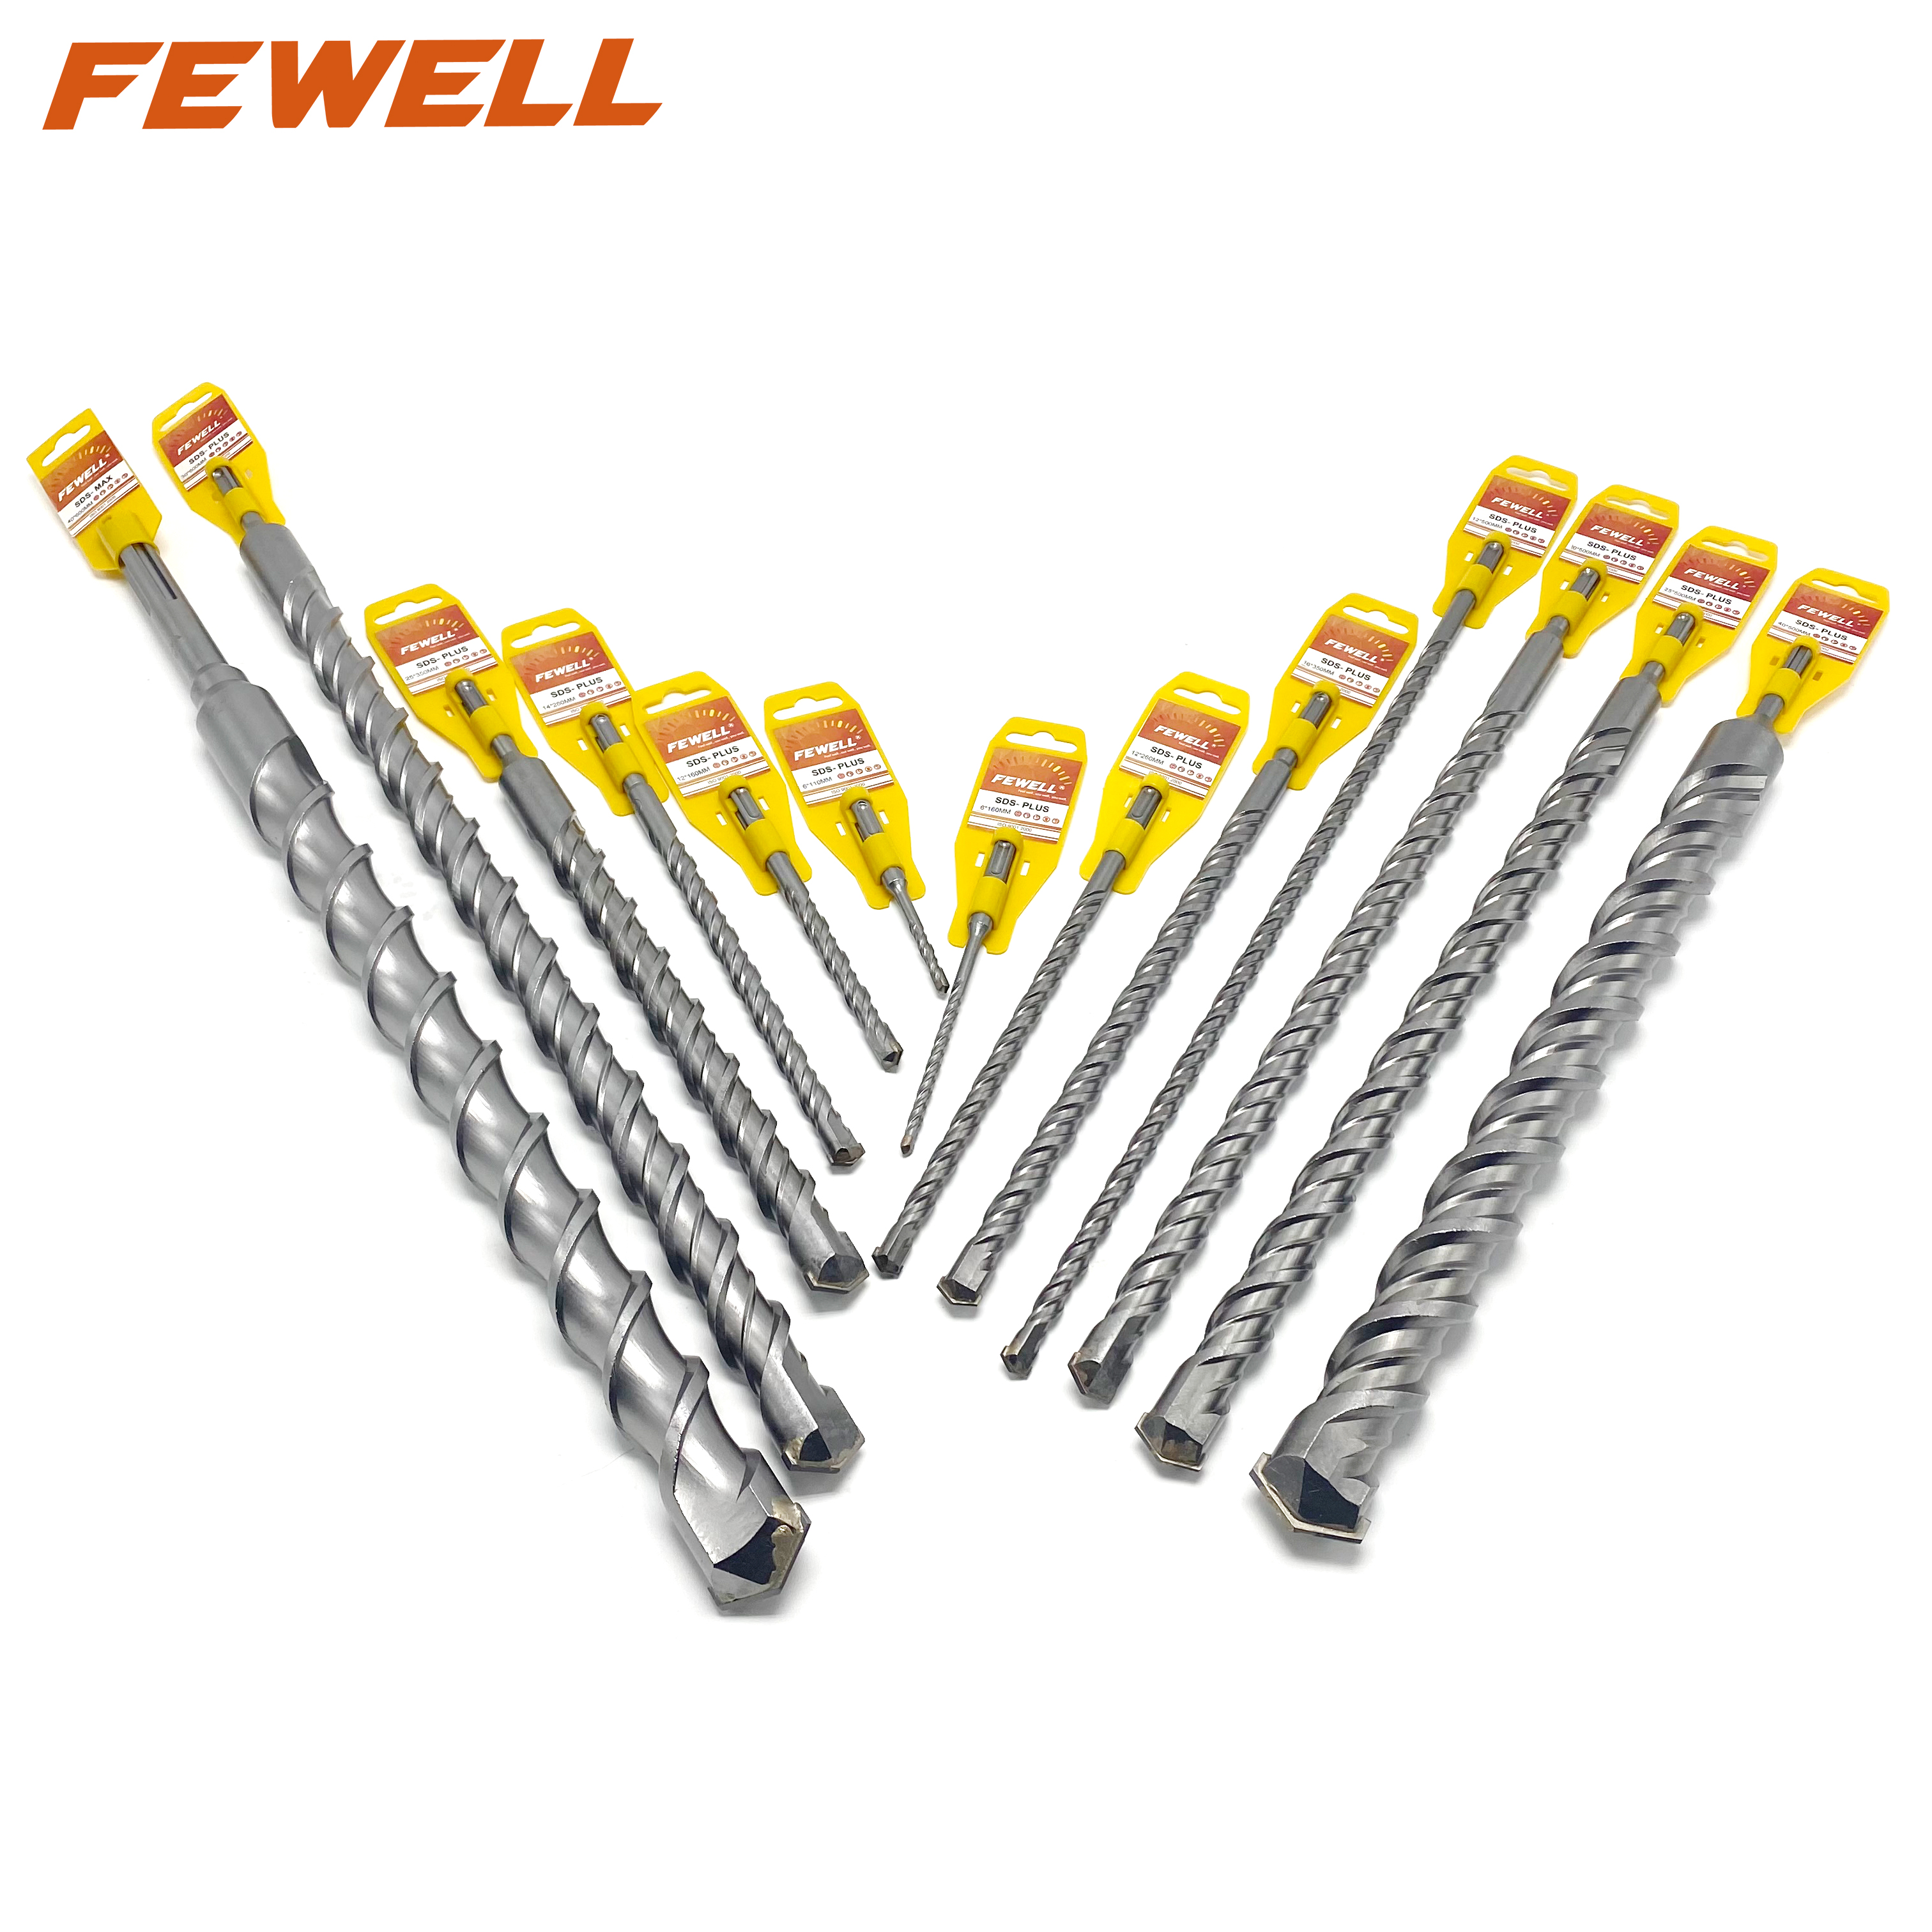 High quality SDS Plus Carbide Single Flat Tip 5mm Double Flute Electric hammer Drill Bit for Concrete wall Masonry Granite